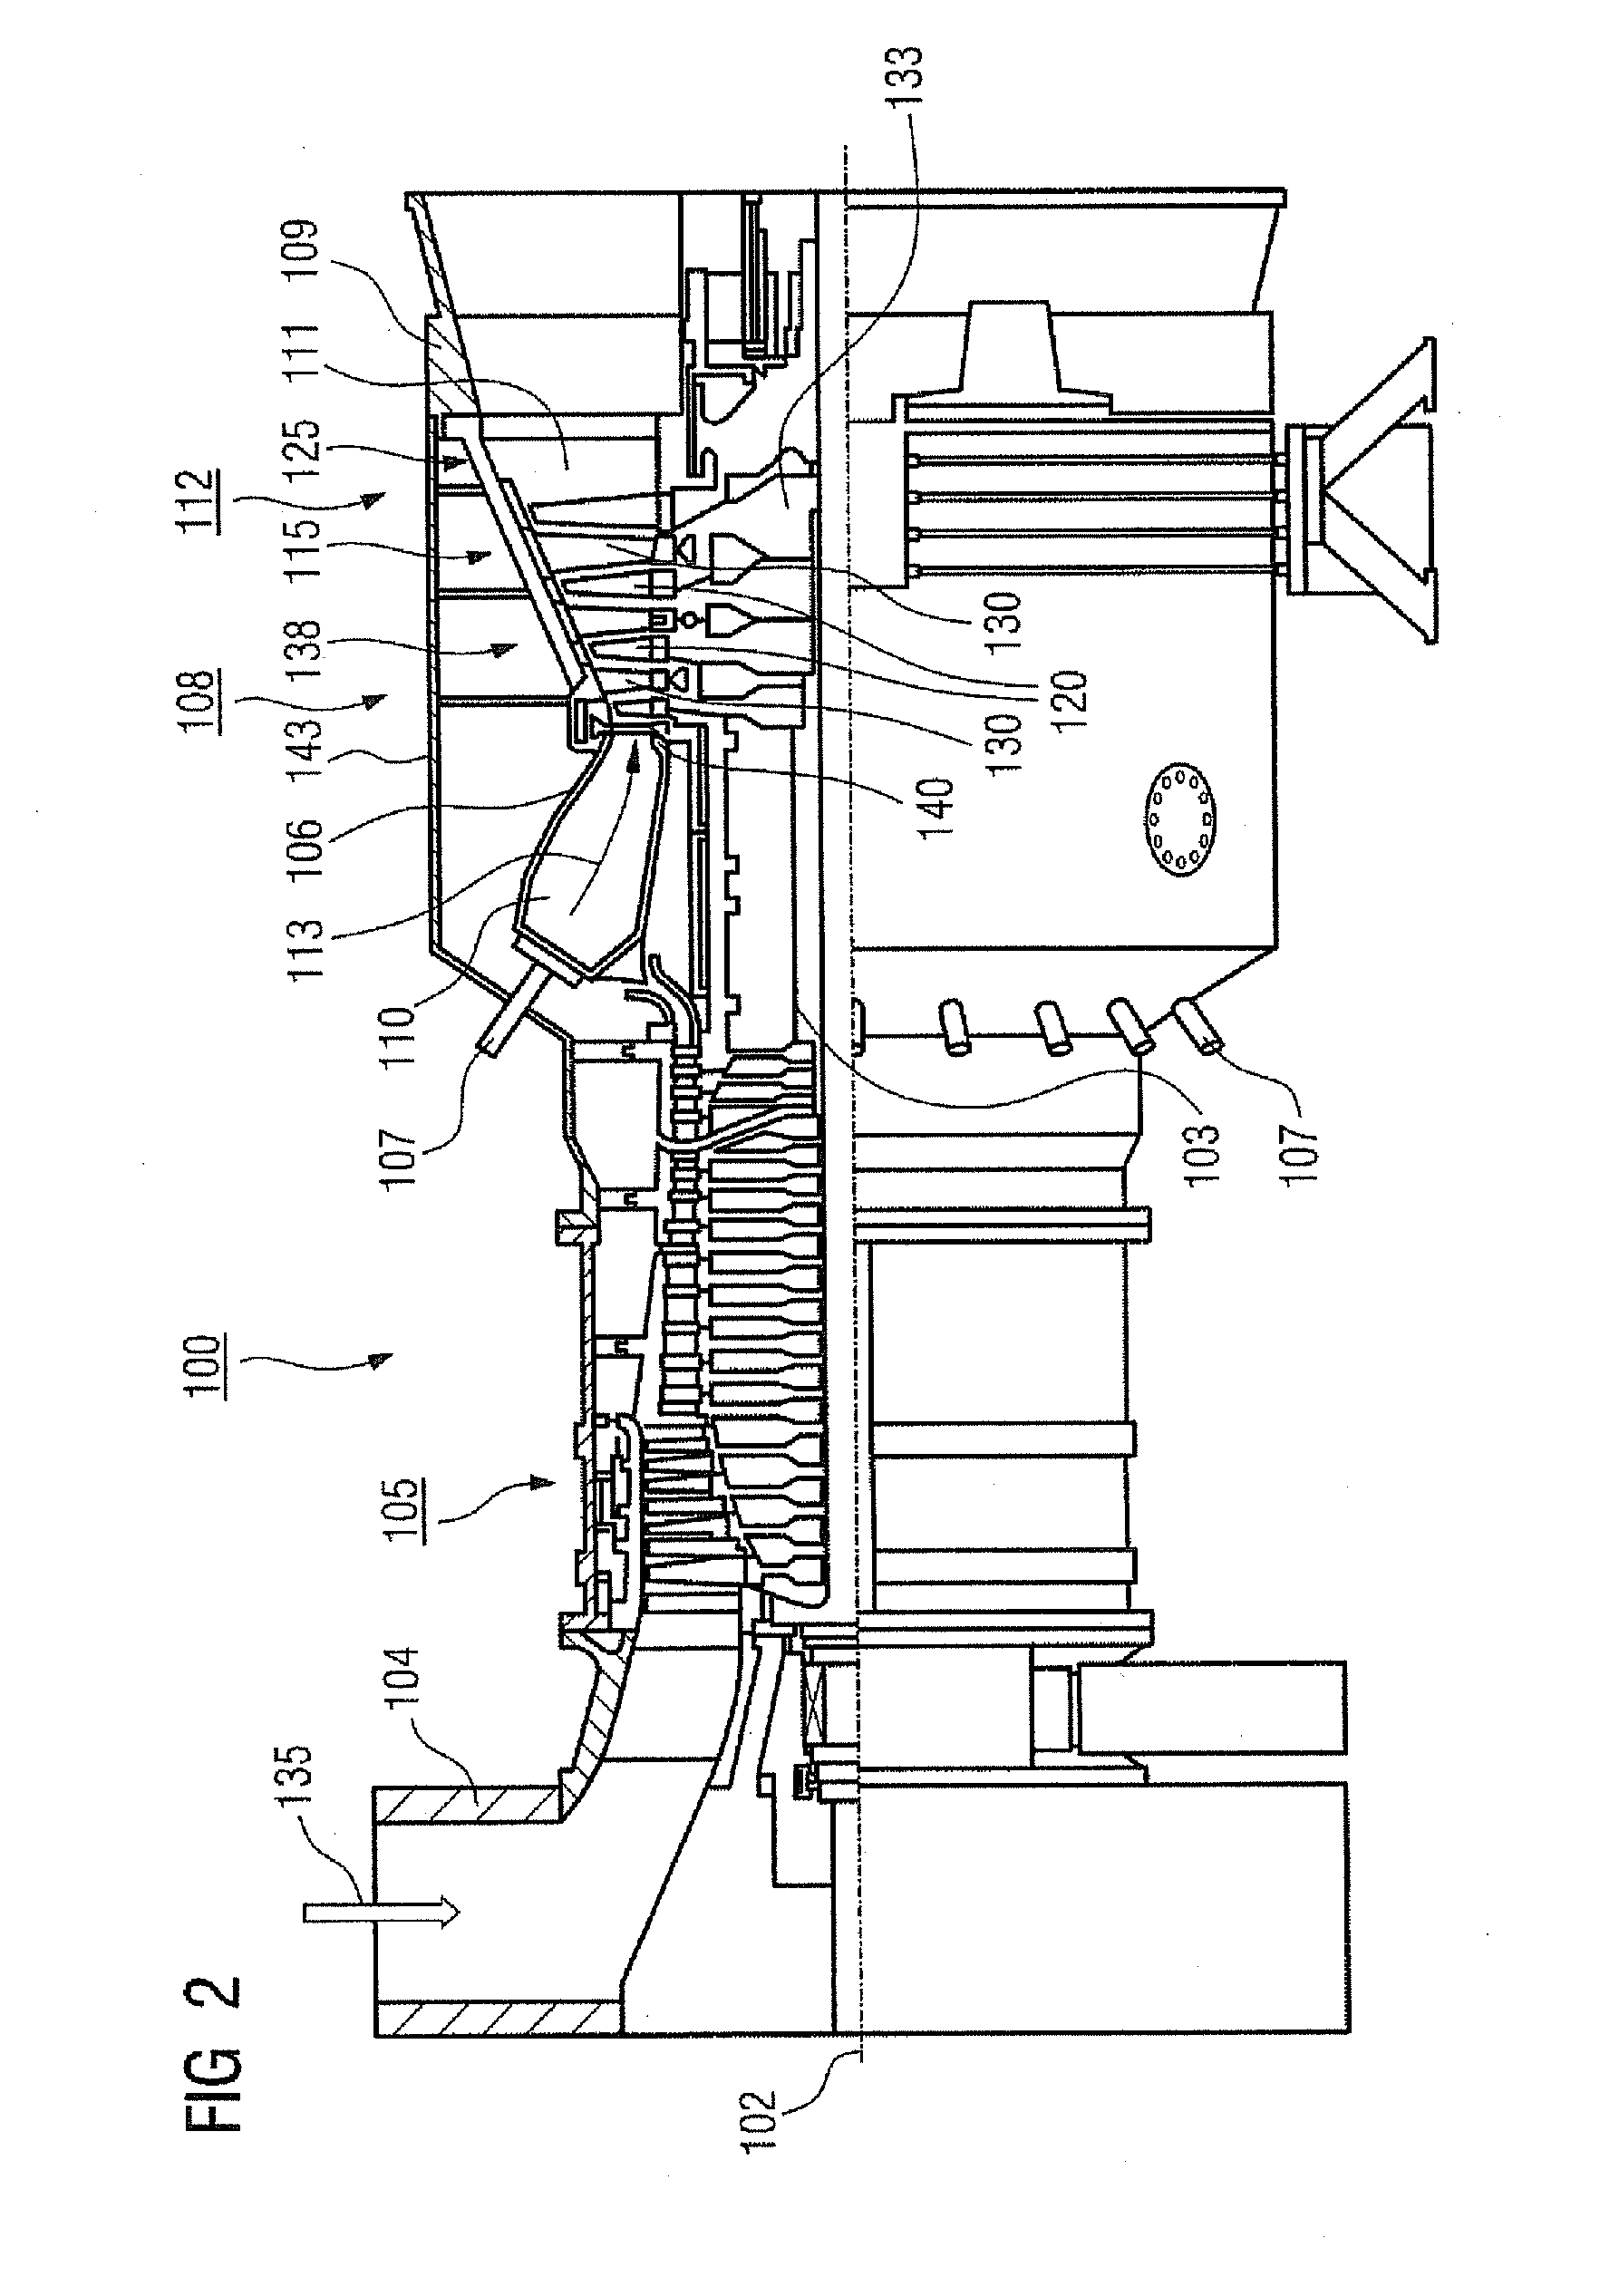 Multiple layer system comprising a metallic layer and a ceramic layer